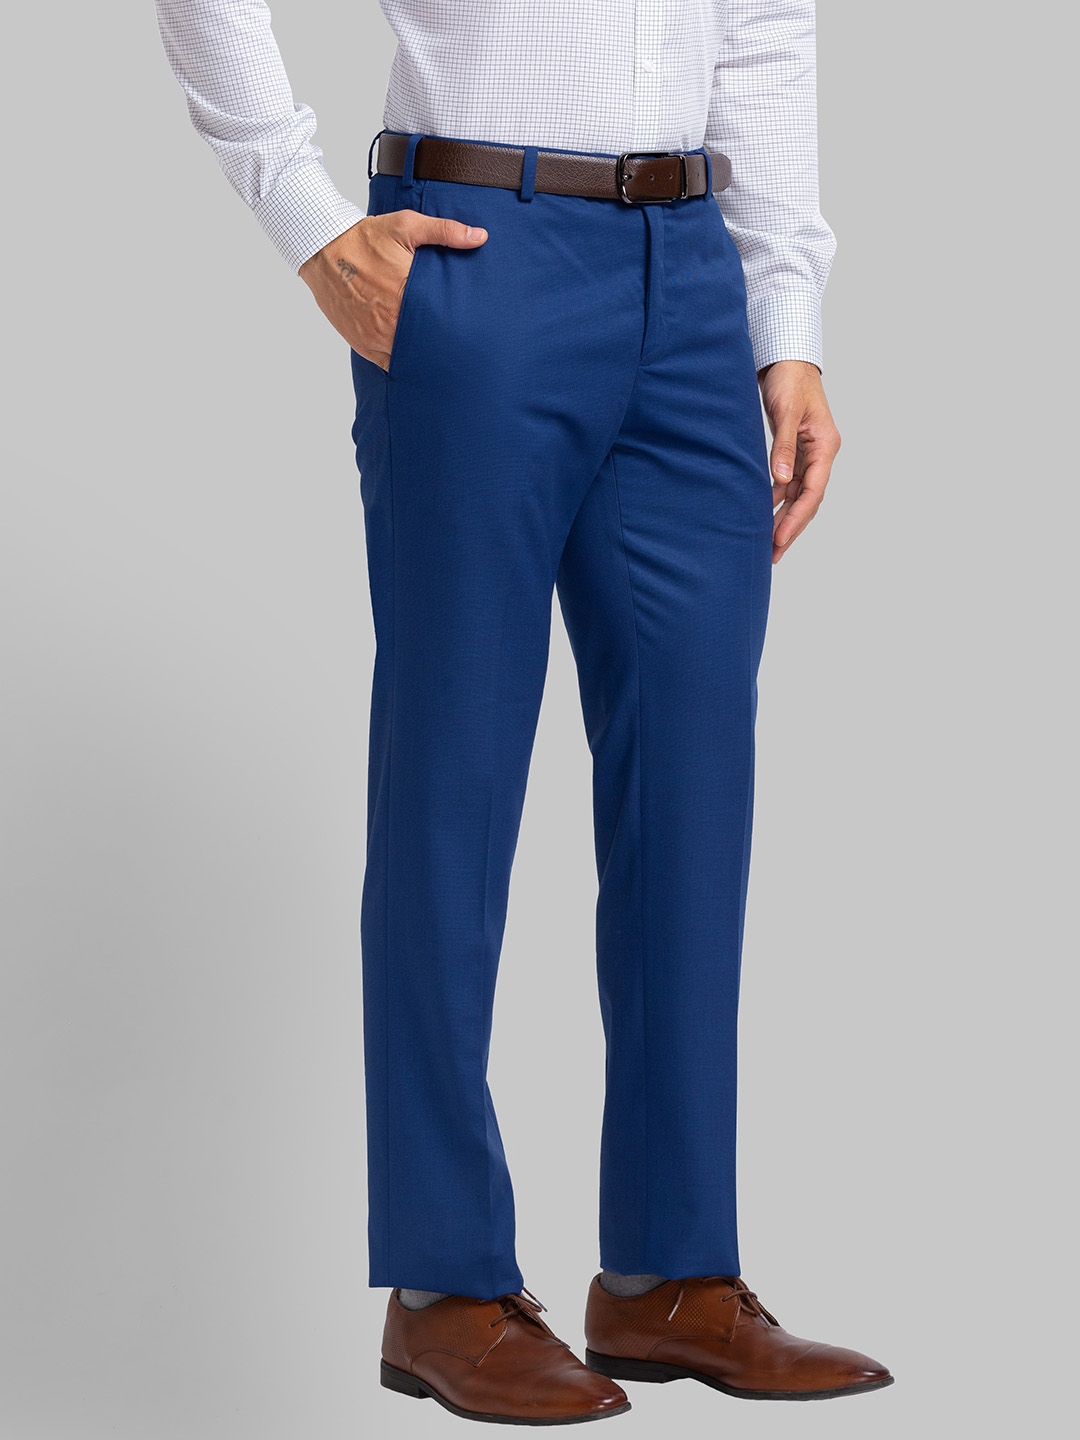 36 Blue Raymond Blue Slim Fit Trouser at Rs 3399/piece in